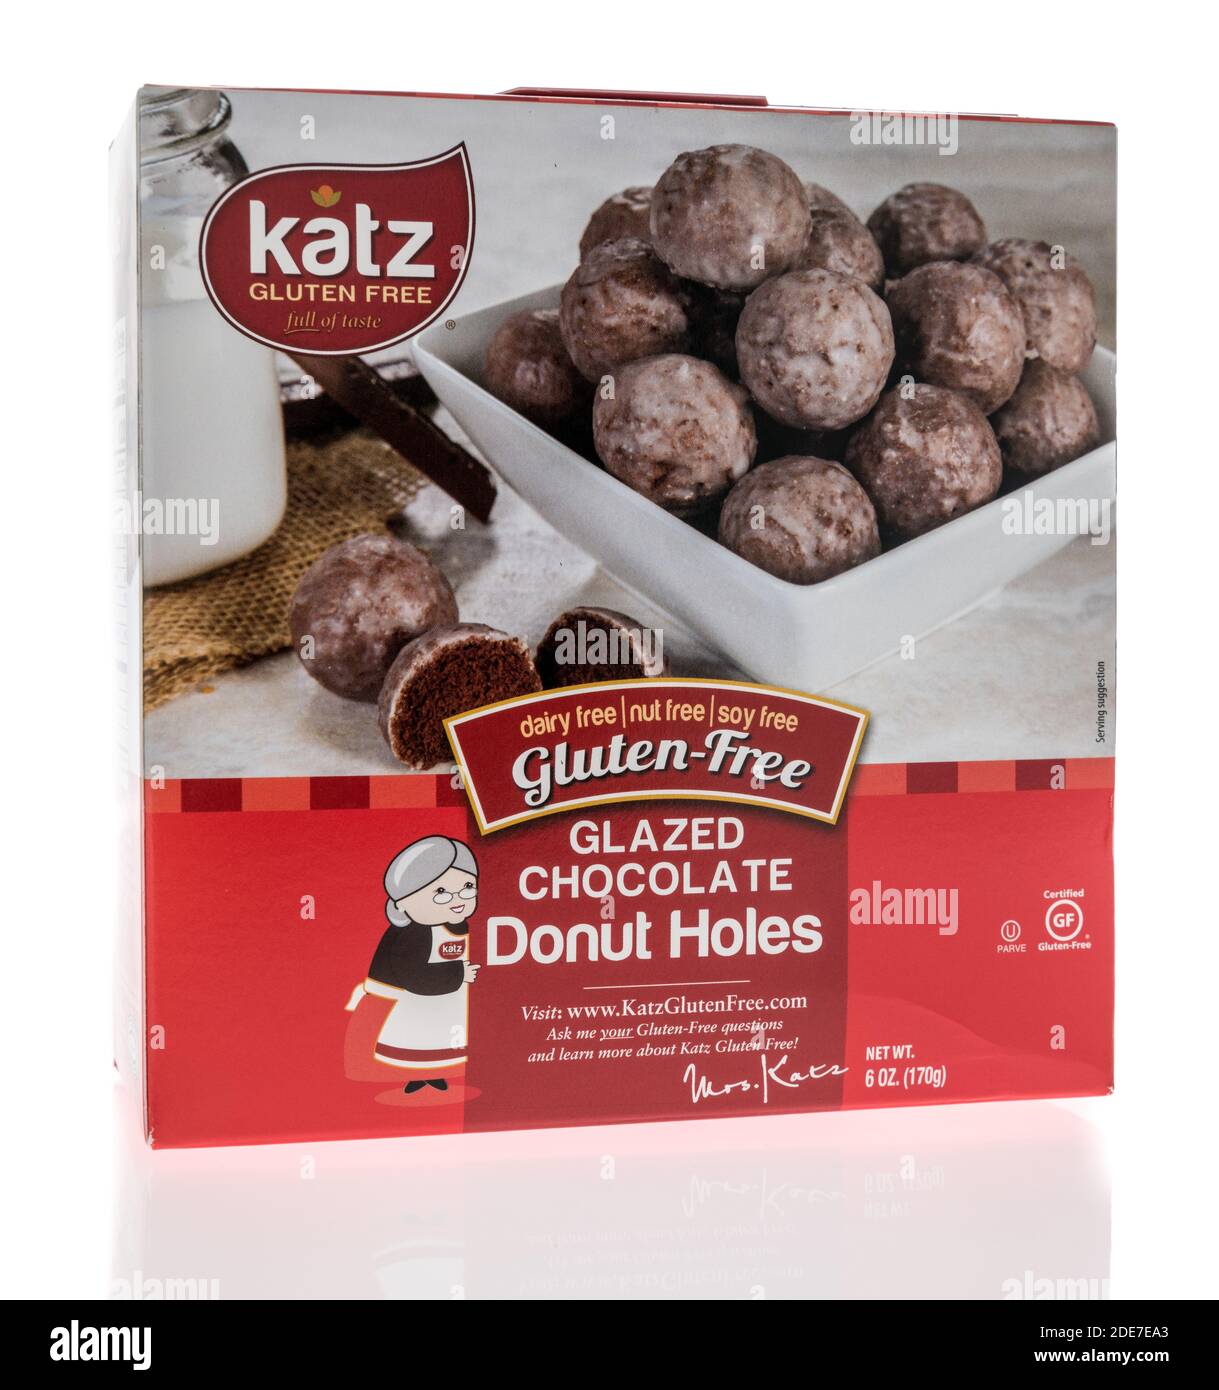 Winneconne, WI -29 November 2020:  A package of Katz glazed chocolate donut holes on an isolated background. Stock Photo